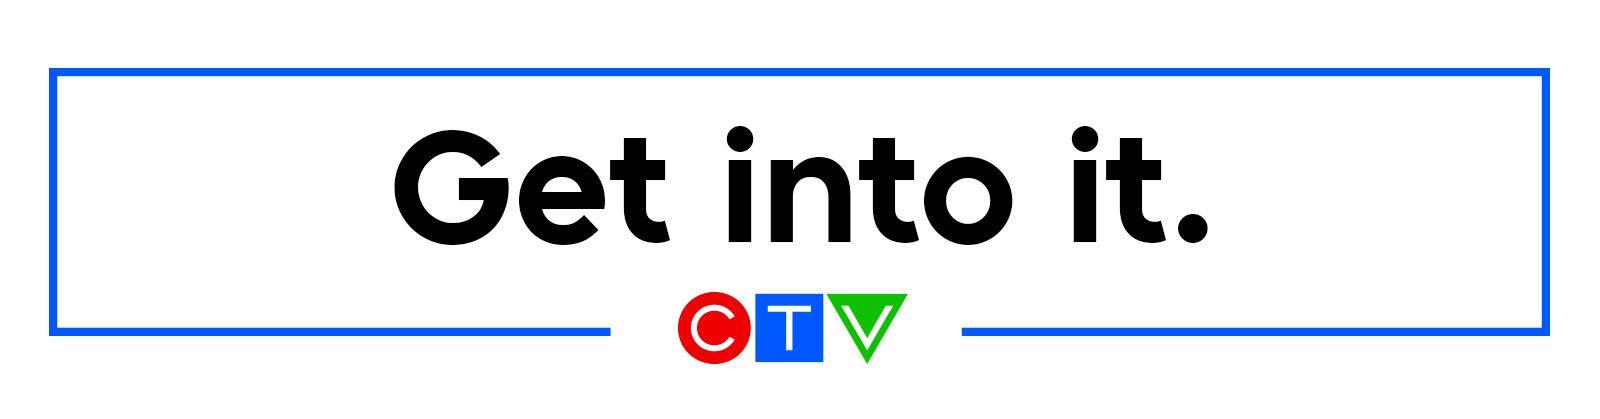 CTV Logo - Brand New: New Logo and On-air Look for CTV done In-house